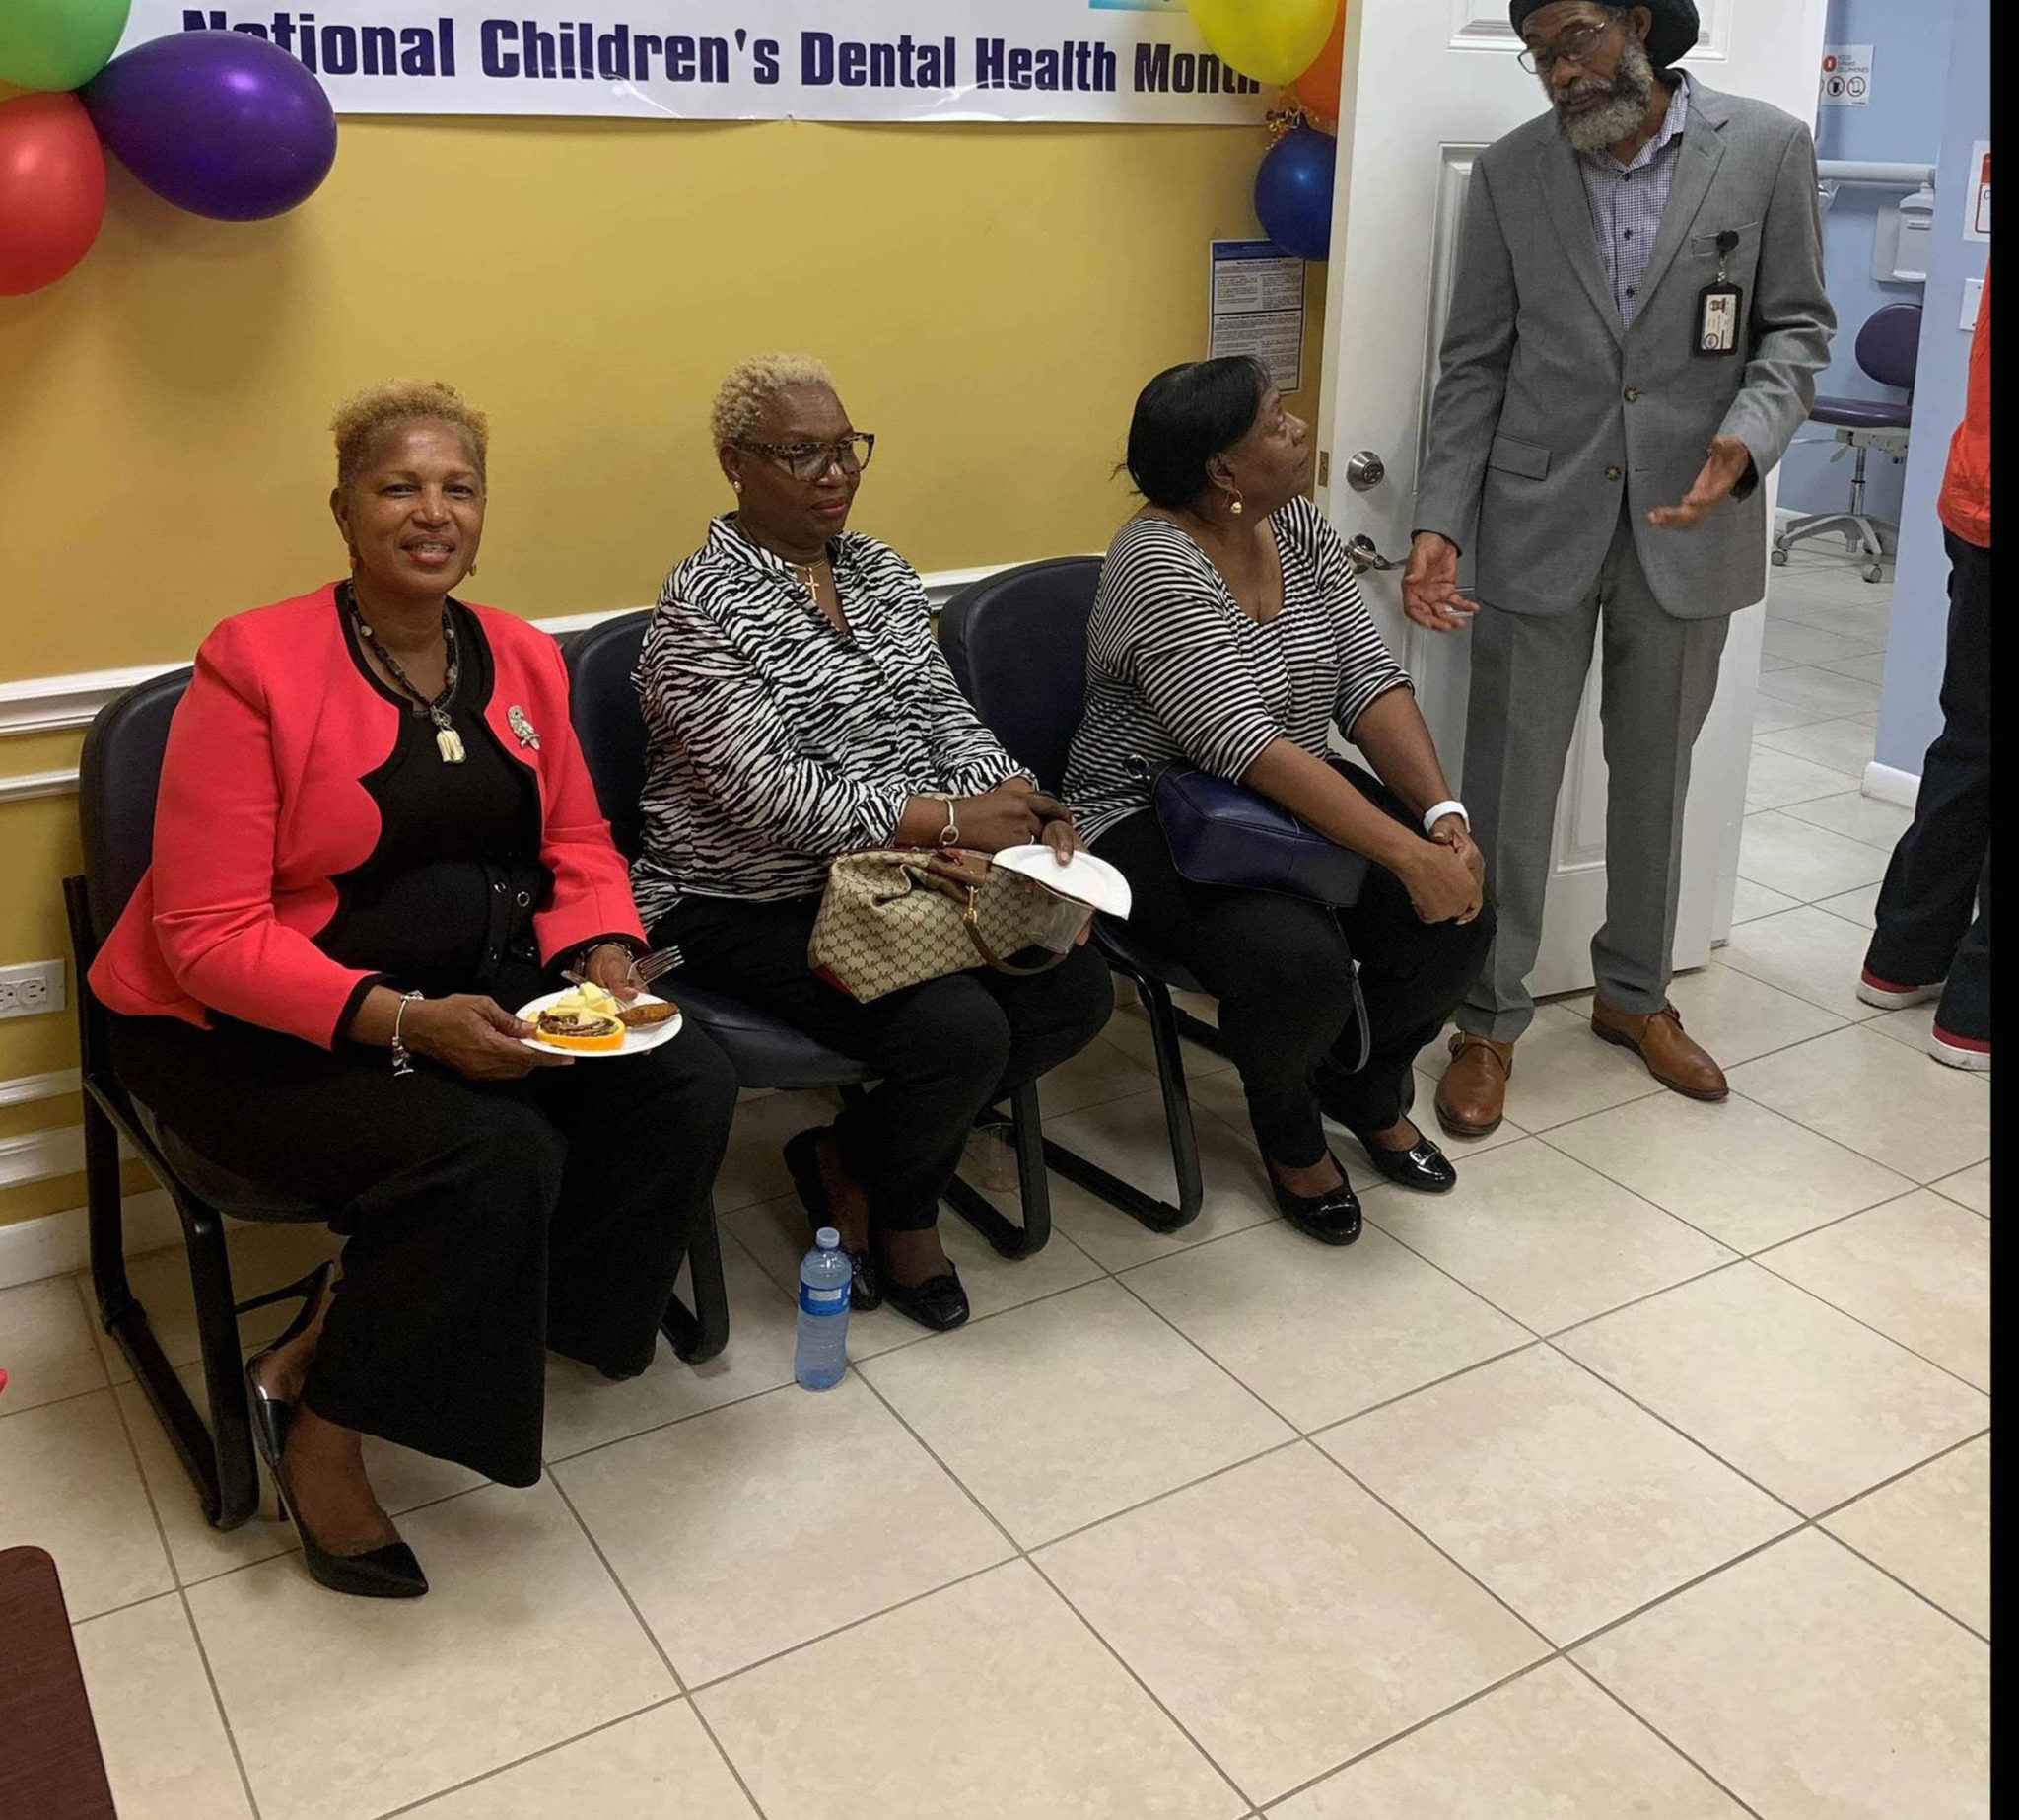 Frederiksted Health Care Executive Director Masserae Sprauve Webster and others attended the soft opening of the Estate Princesse dental clinic expansion. (Photo courtesy of Frederiksted Health Care)